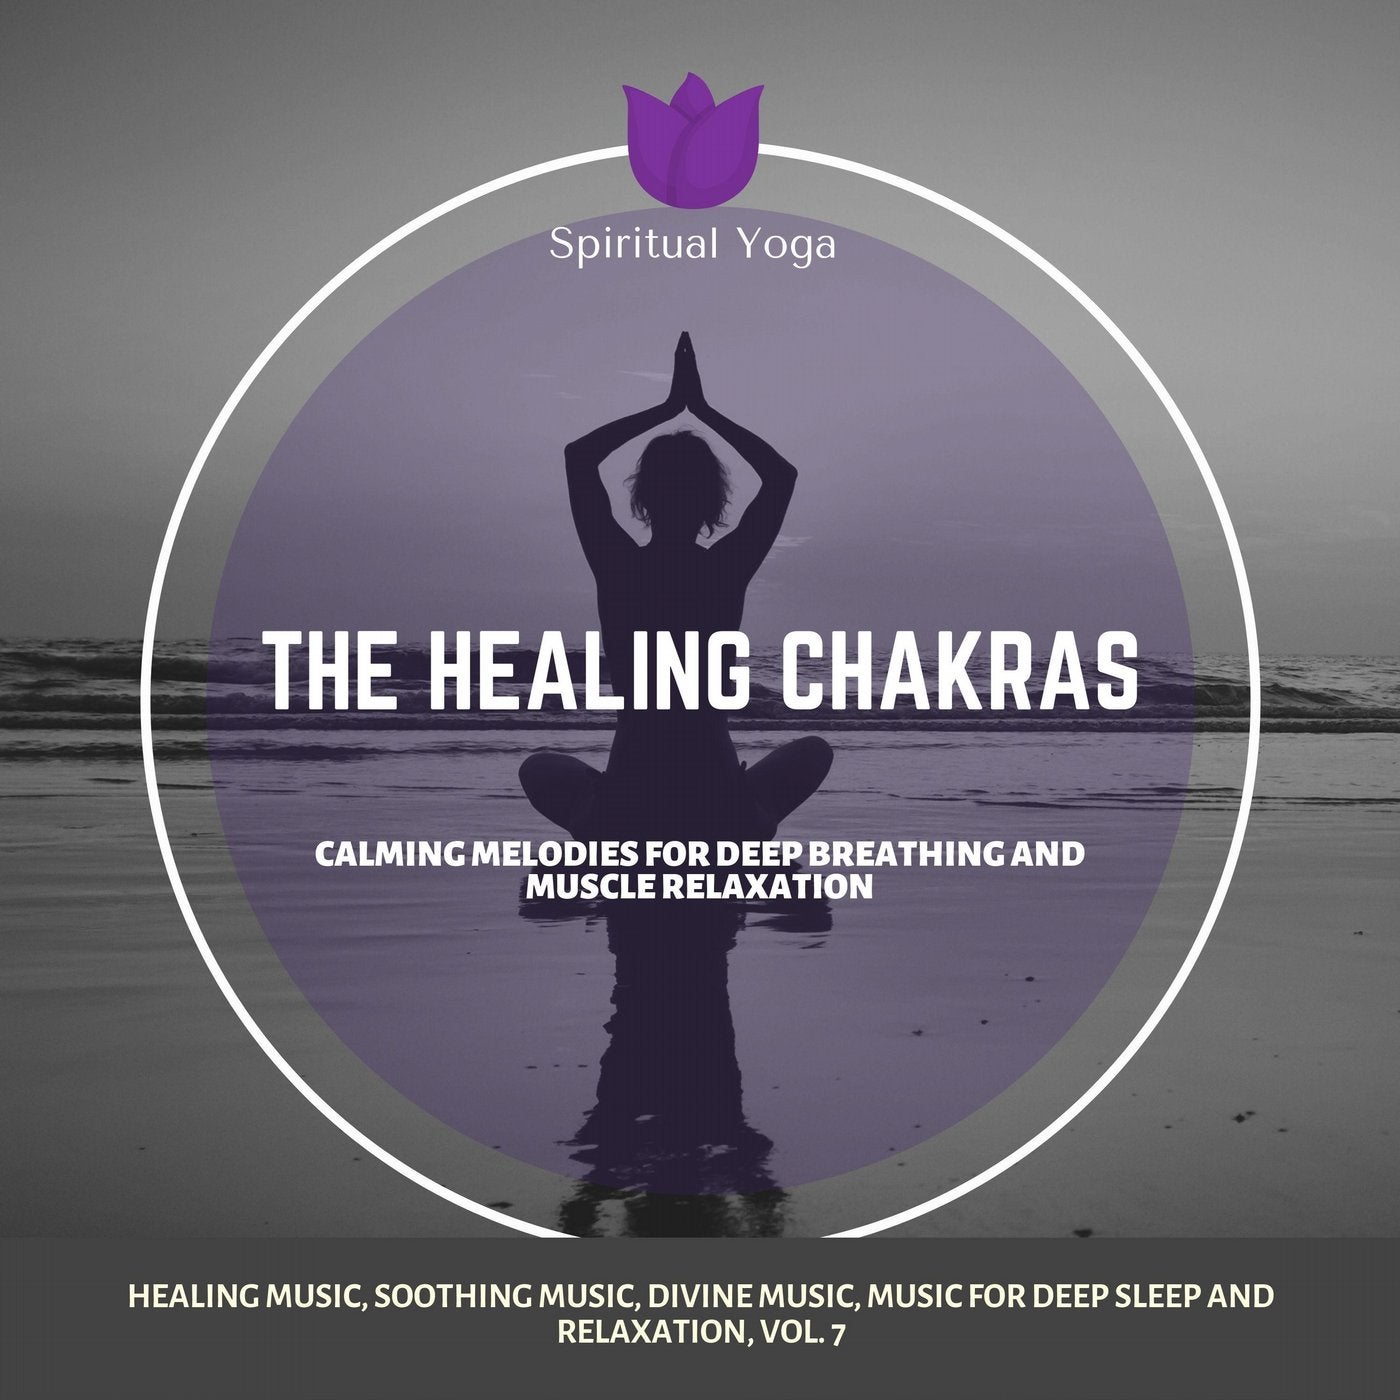 The Healing Chakras (Calming Melodies For Deep Breathing And Muscle Relaxation) (Healing Music, Soothing Music, Divine Music, Music For Deep Sleep And Relaxation, Vol. 7)